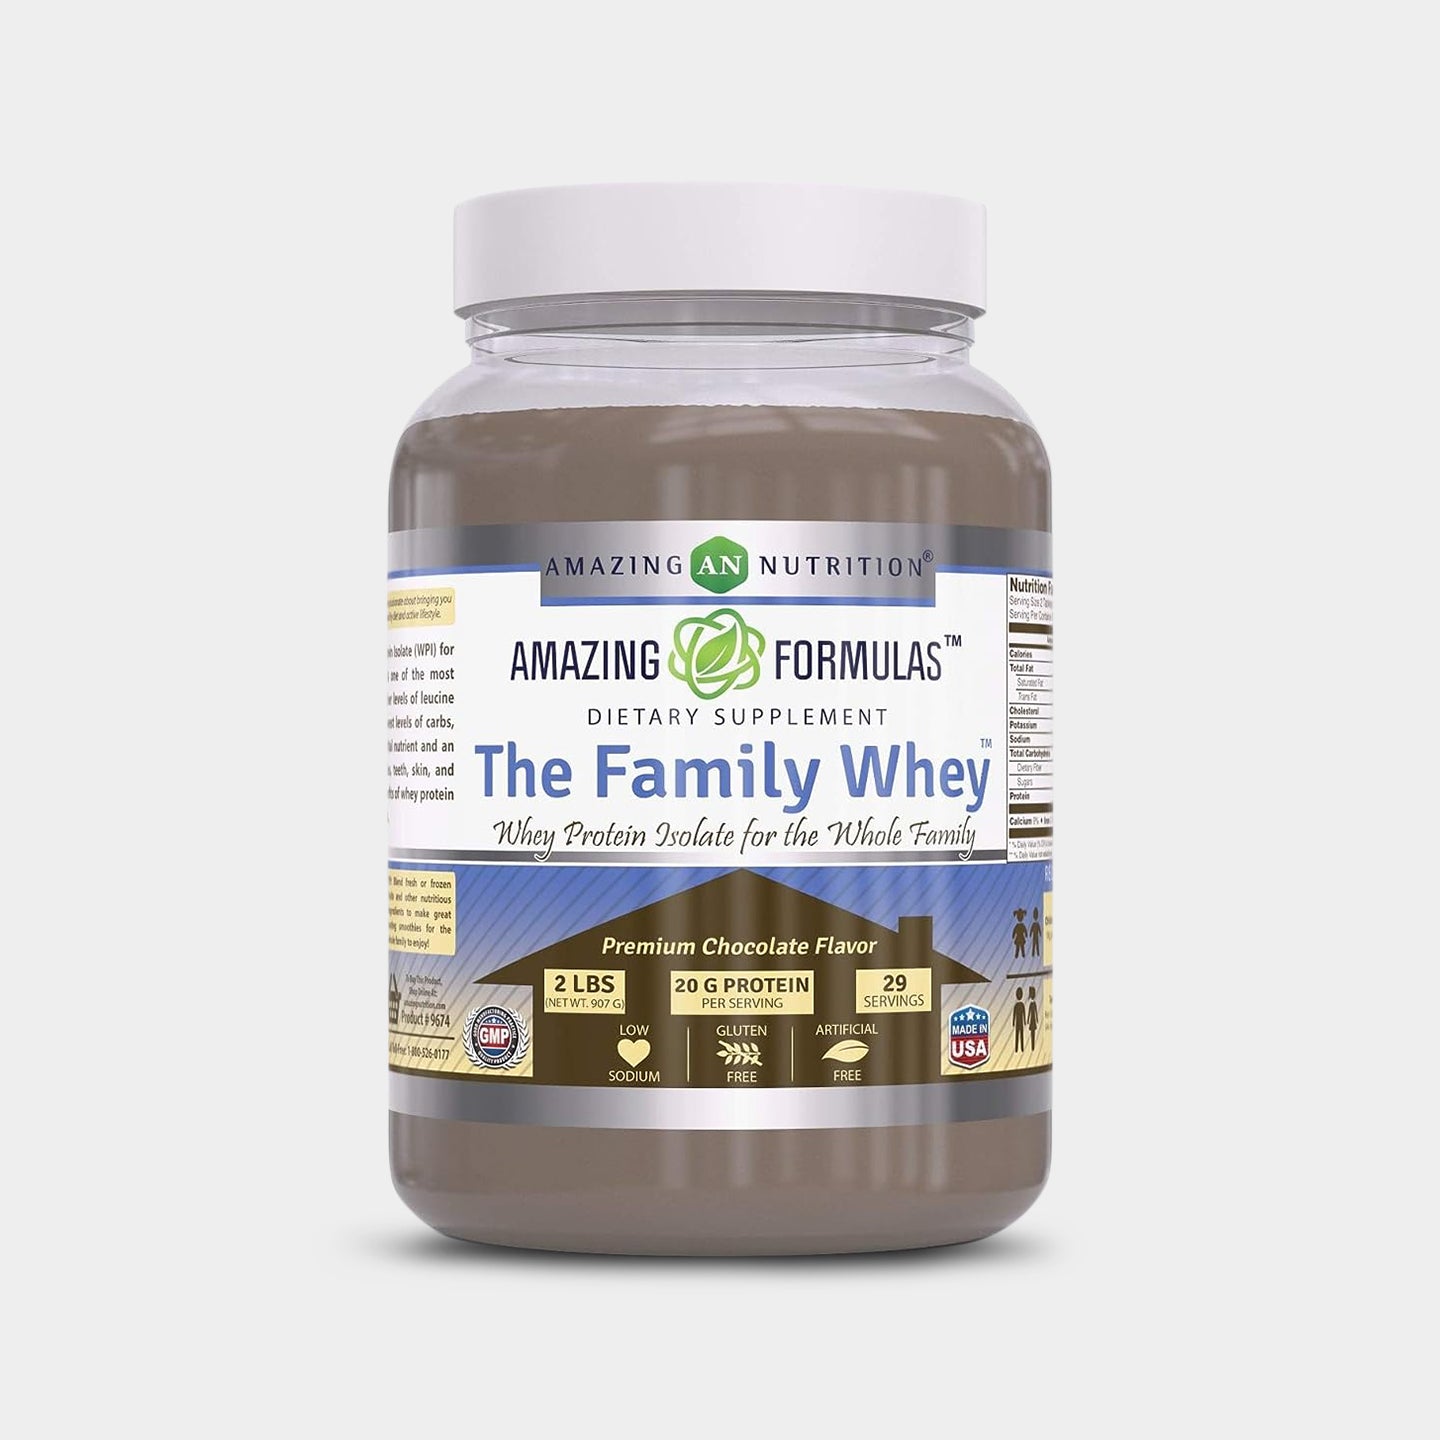 Amazing Formulas The Family Whey - Whey Protein Isolate, Chocolate, 2 Lbs A1